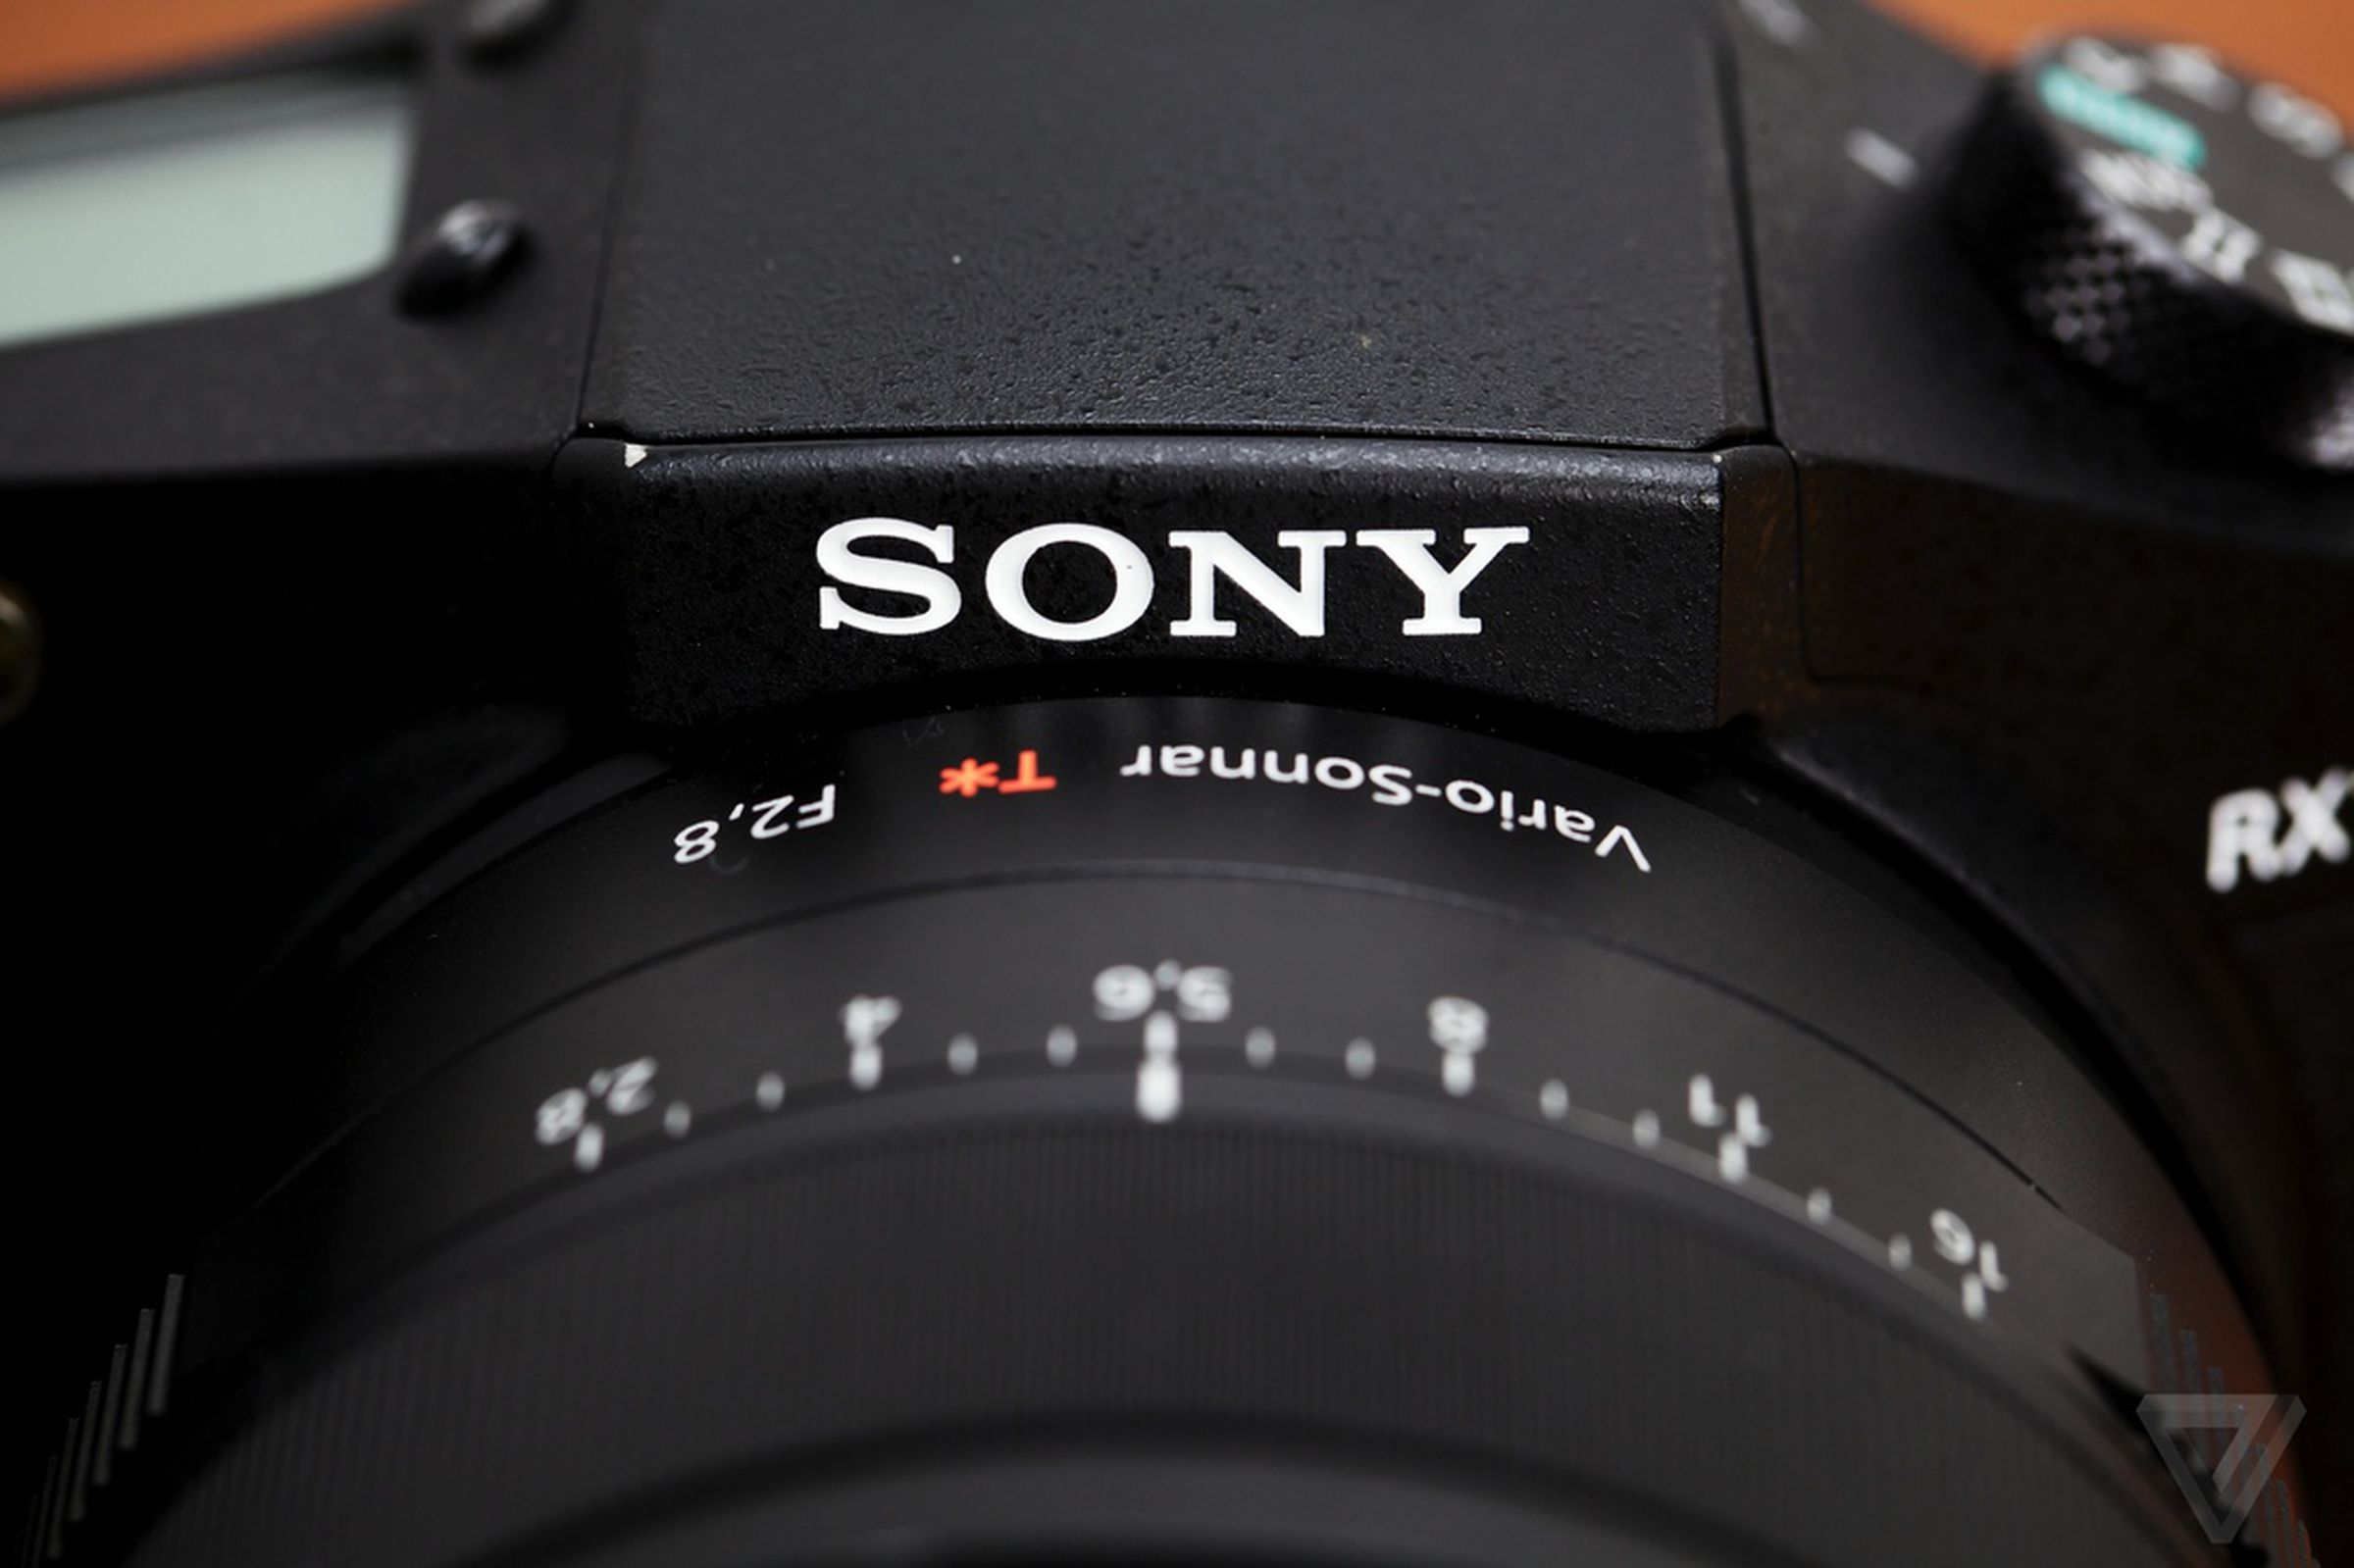 Sony RX10 pictures and sample shots